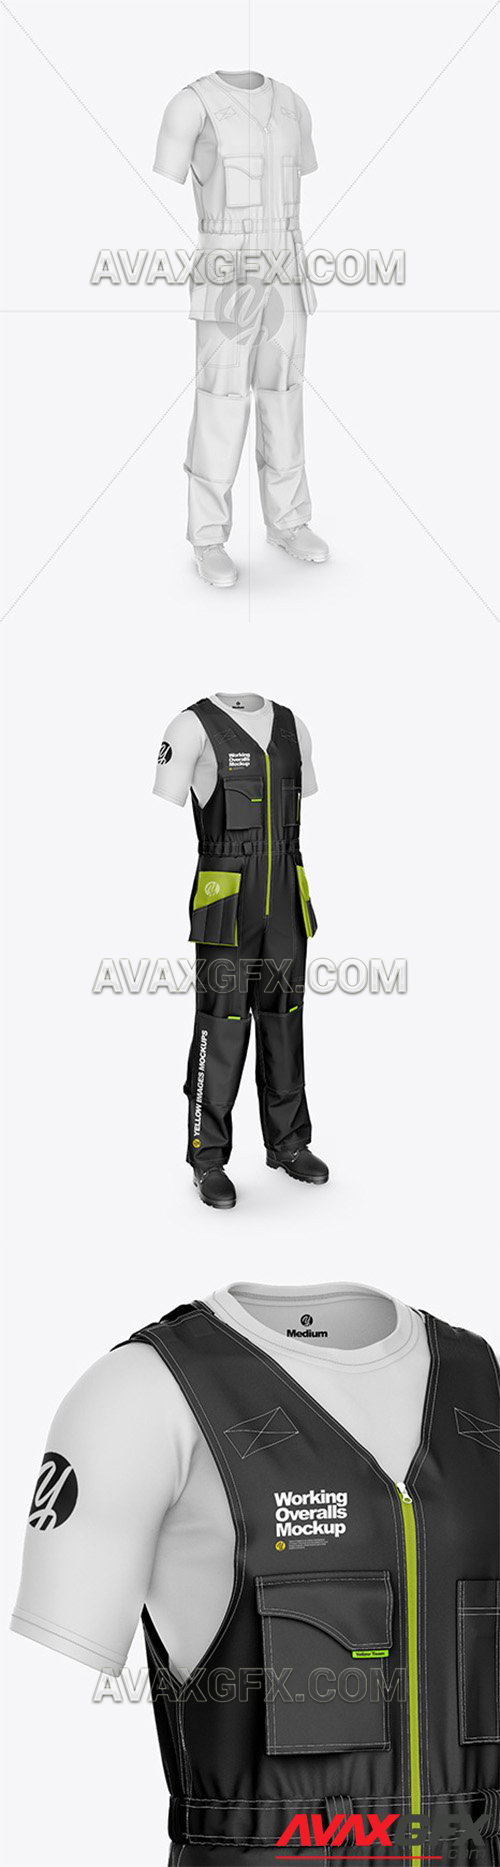 Working Overalls Mockup – Front Half Side View 58267